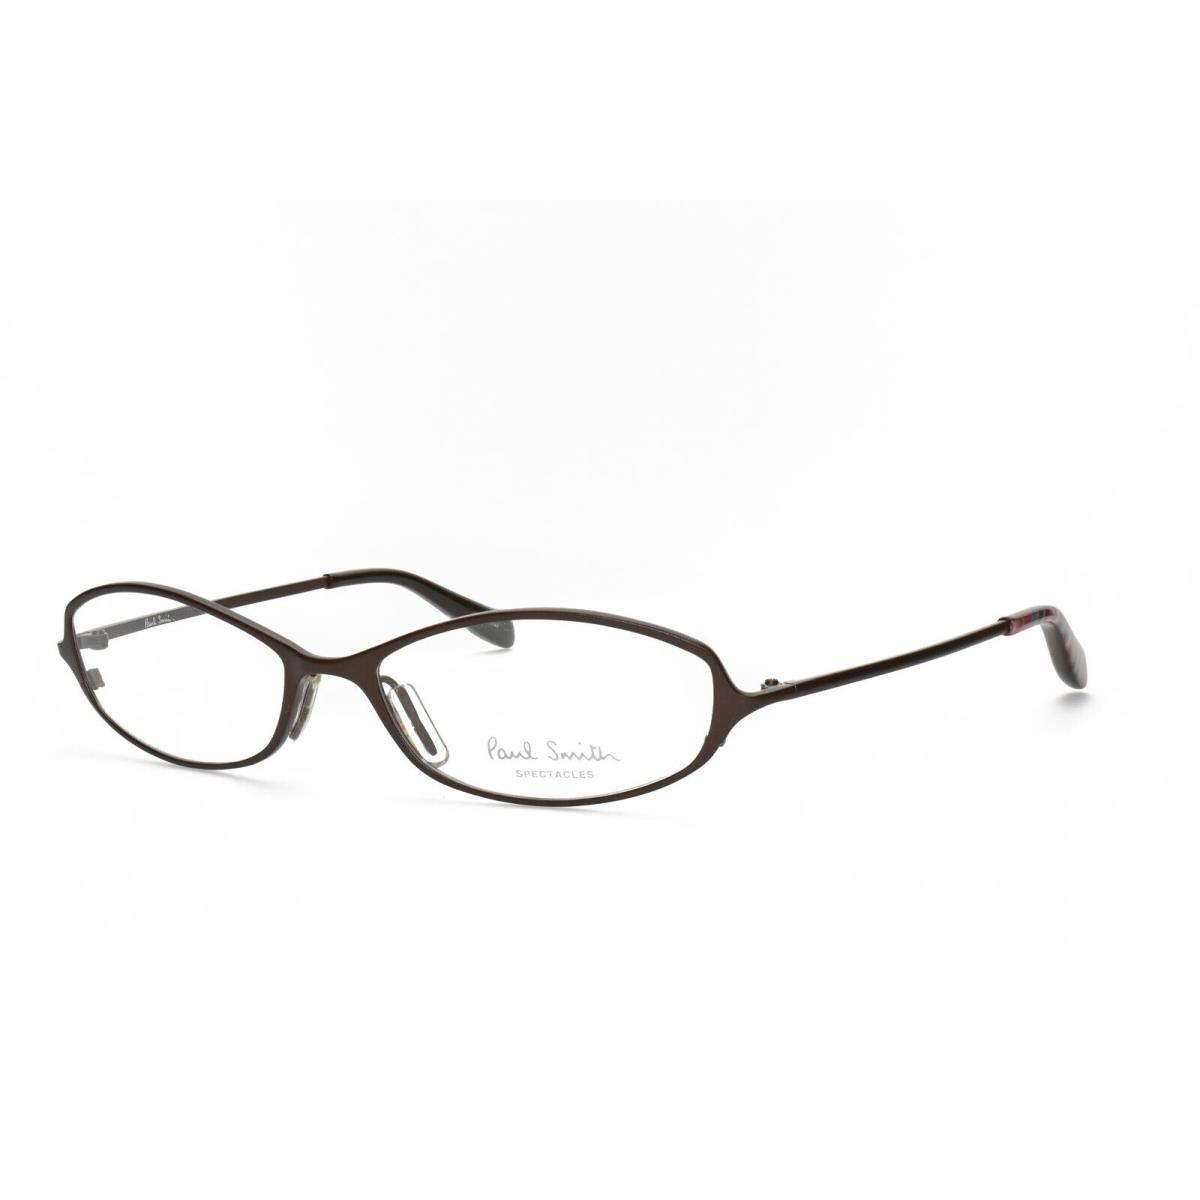 Paul Smith PS 199 Cho Eyeglasses Frames Only 51-16-130